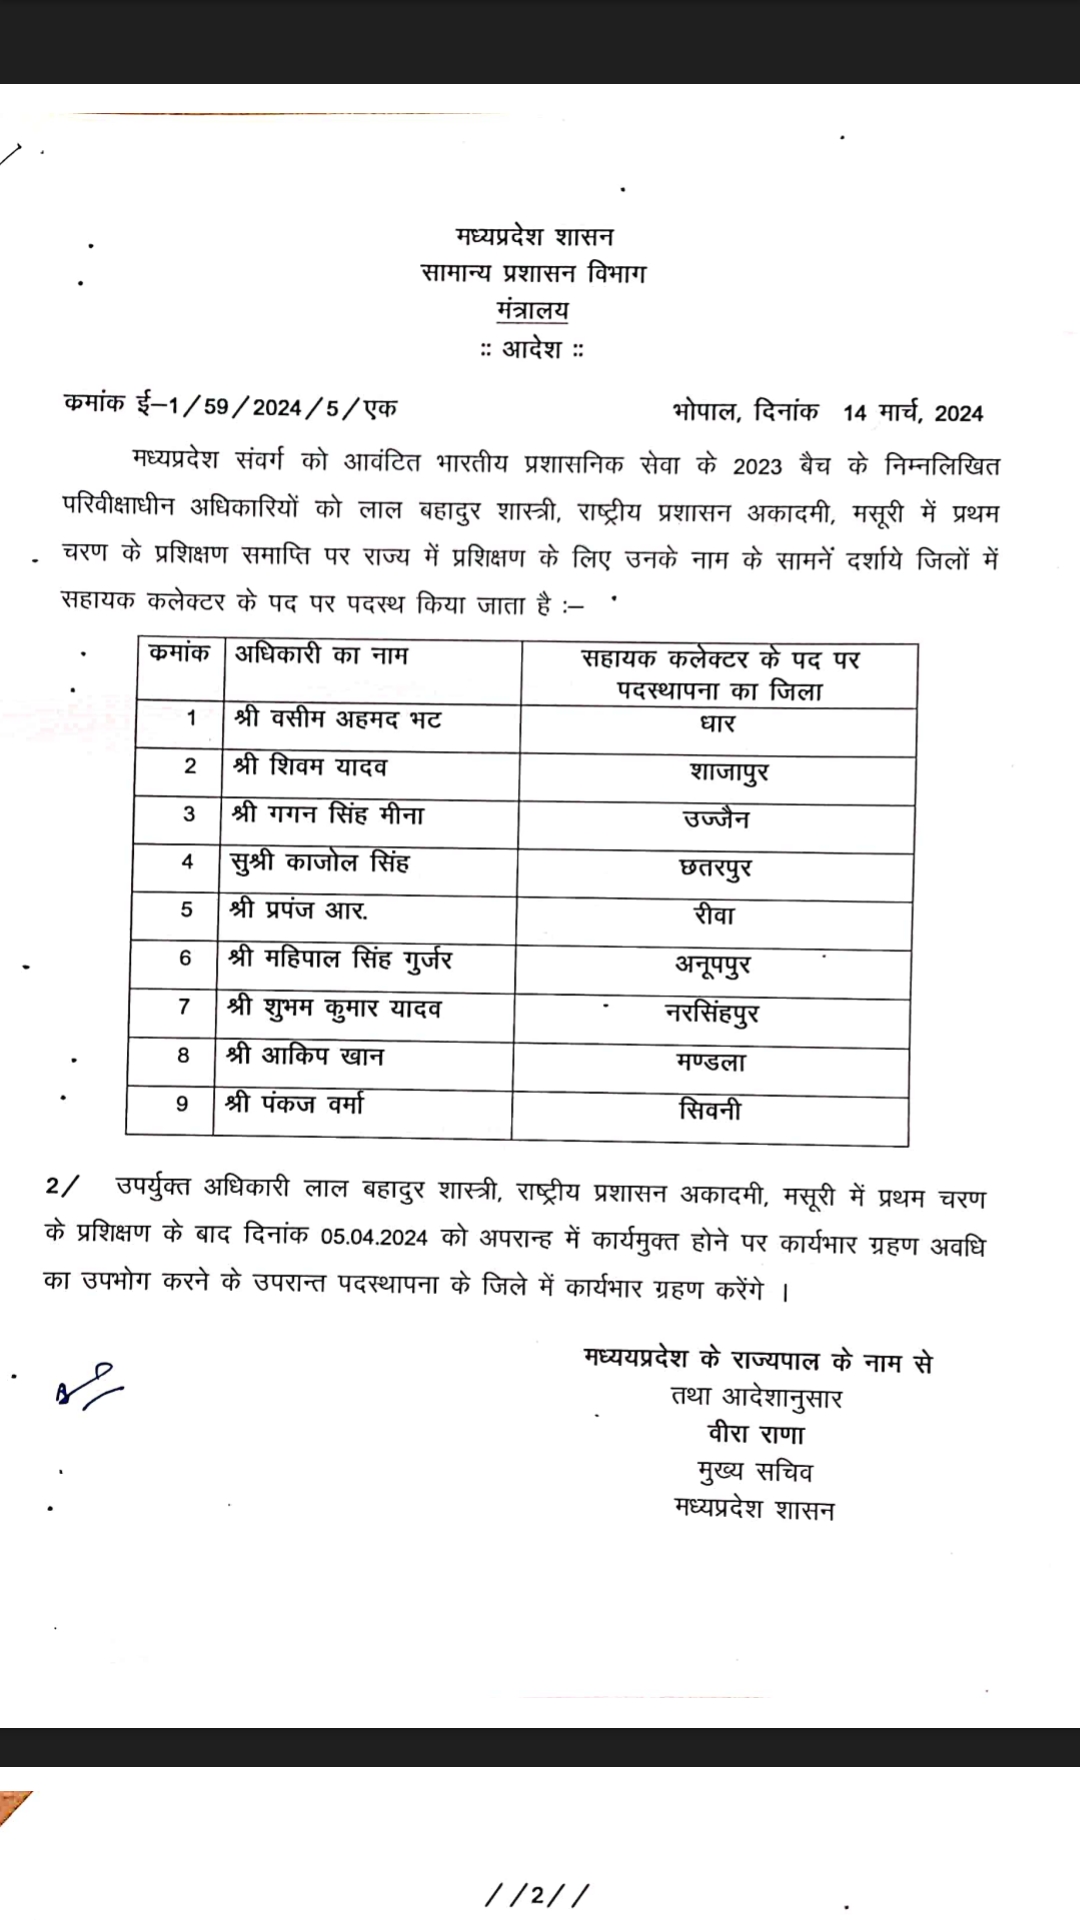 MP 37 IAS officers Transfer